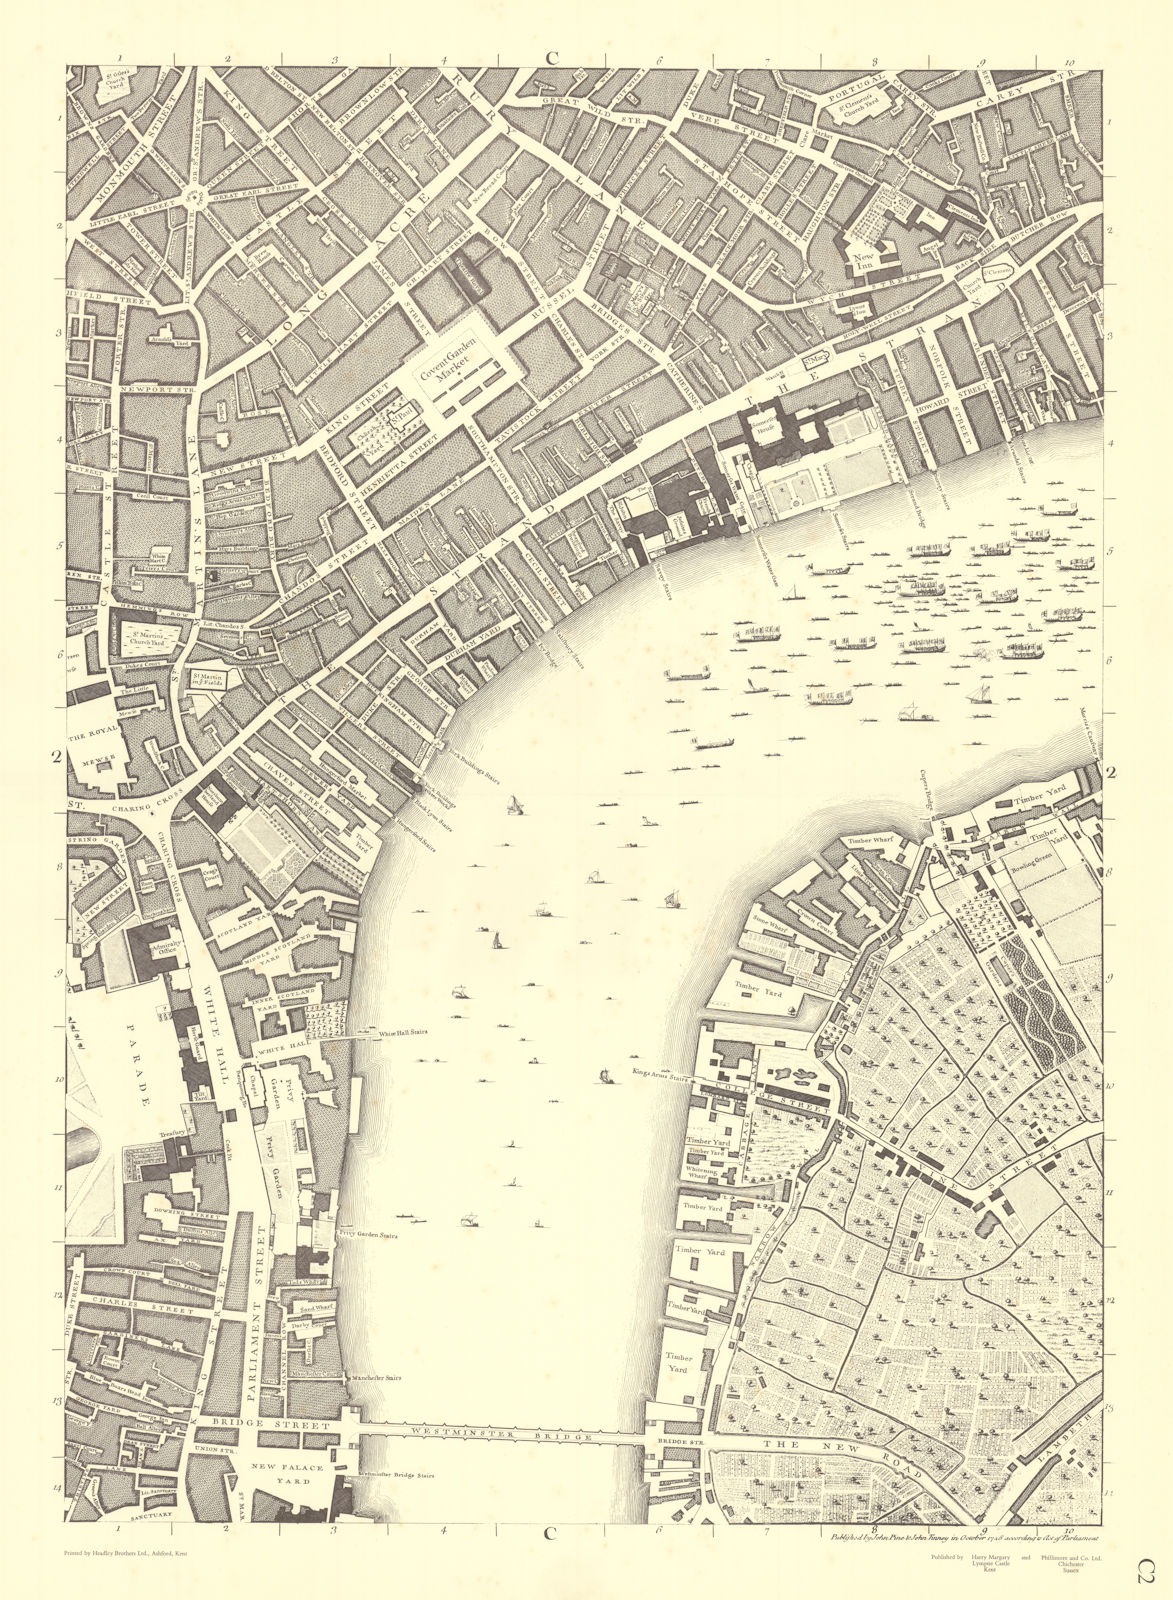 Waterloo Westminster South Bank Covent Garden C2. After ROCQUE 1971 (1746) map